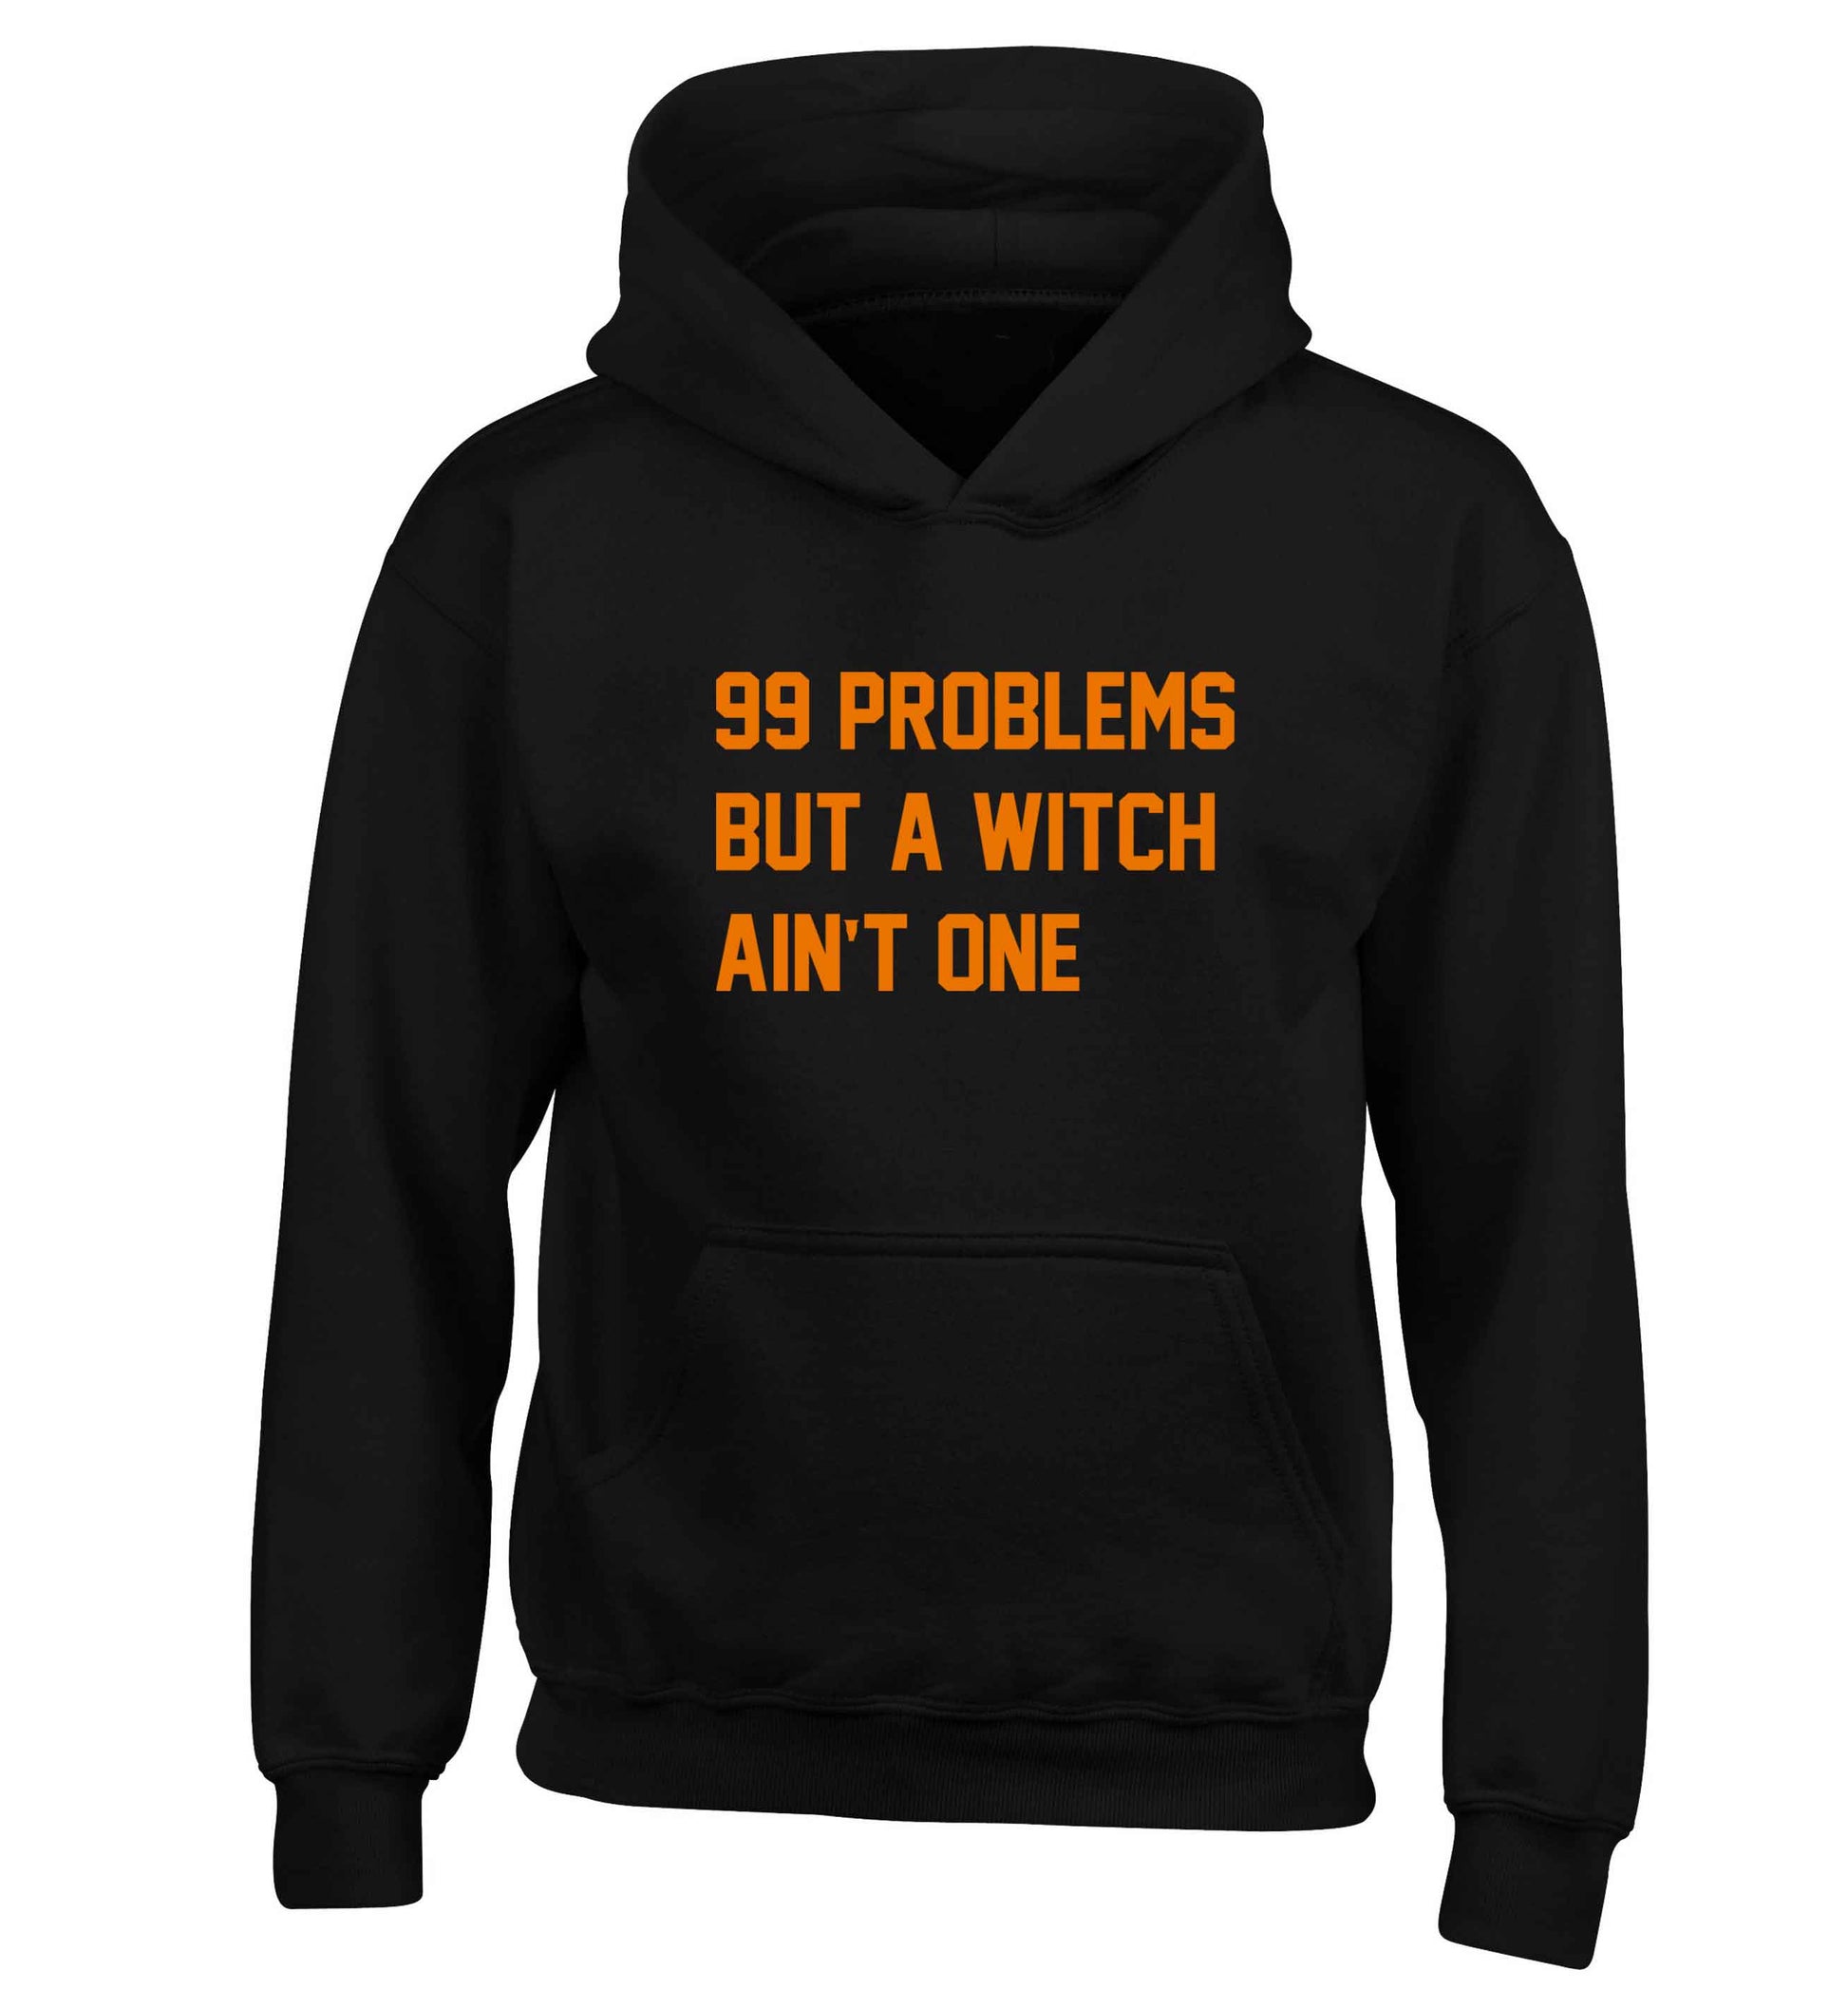 99 Problems but a witch aint one children's black hoodie 12-13 Years